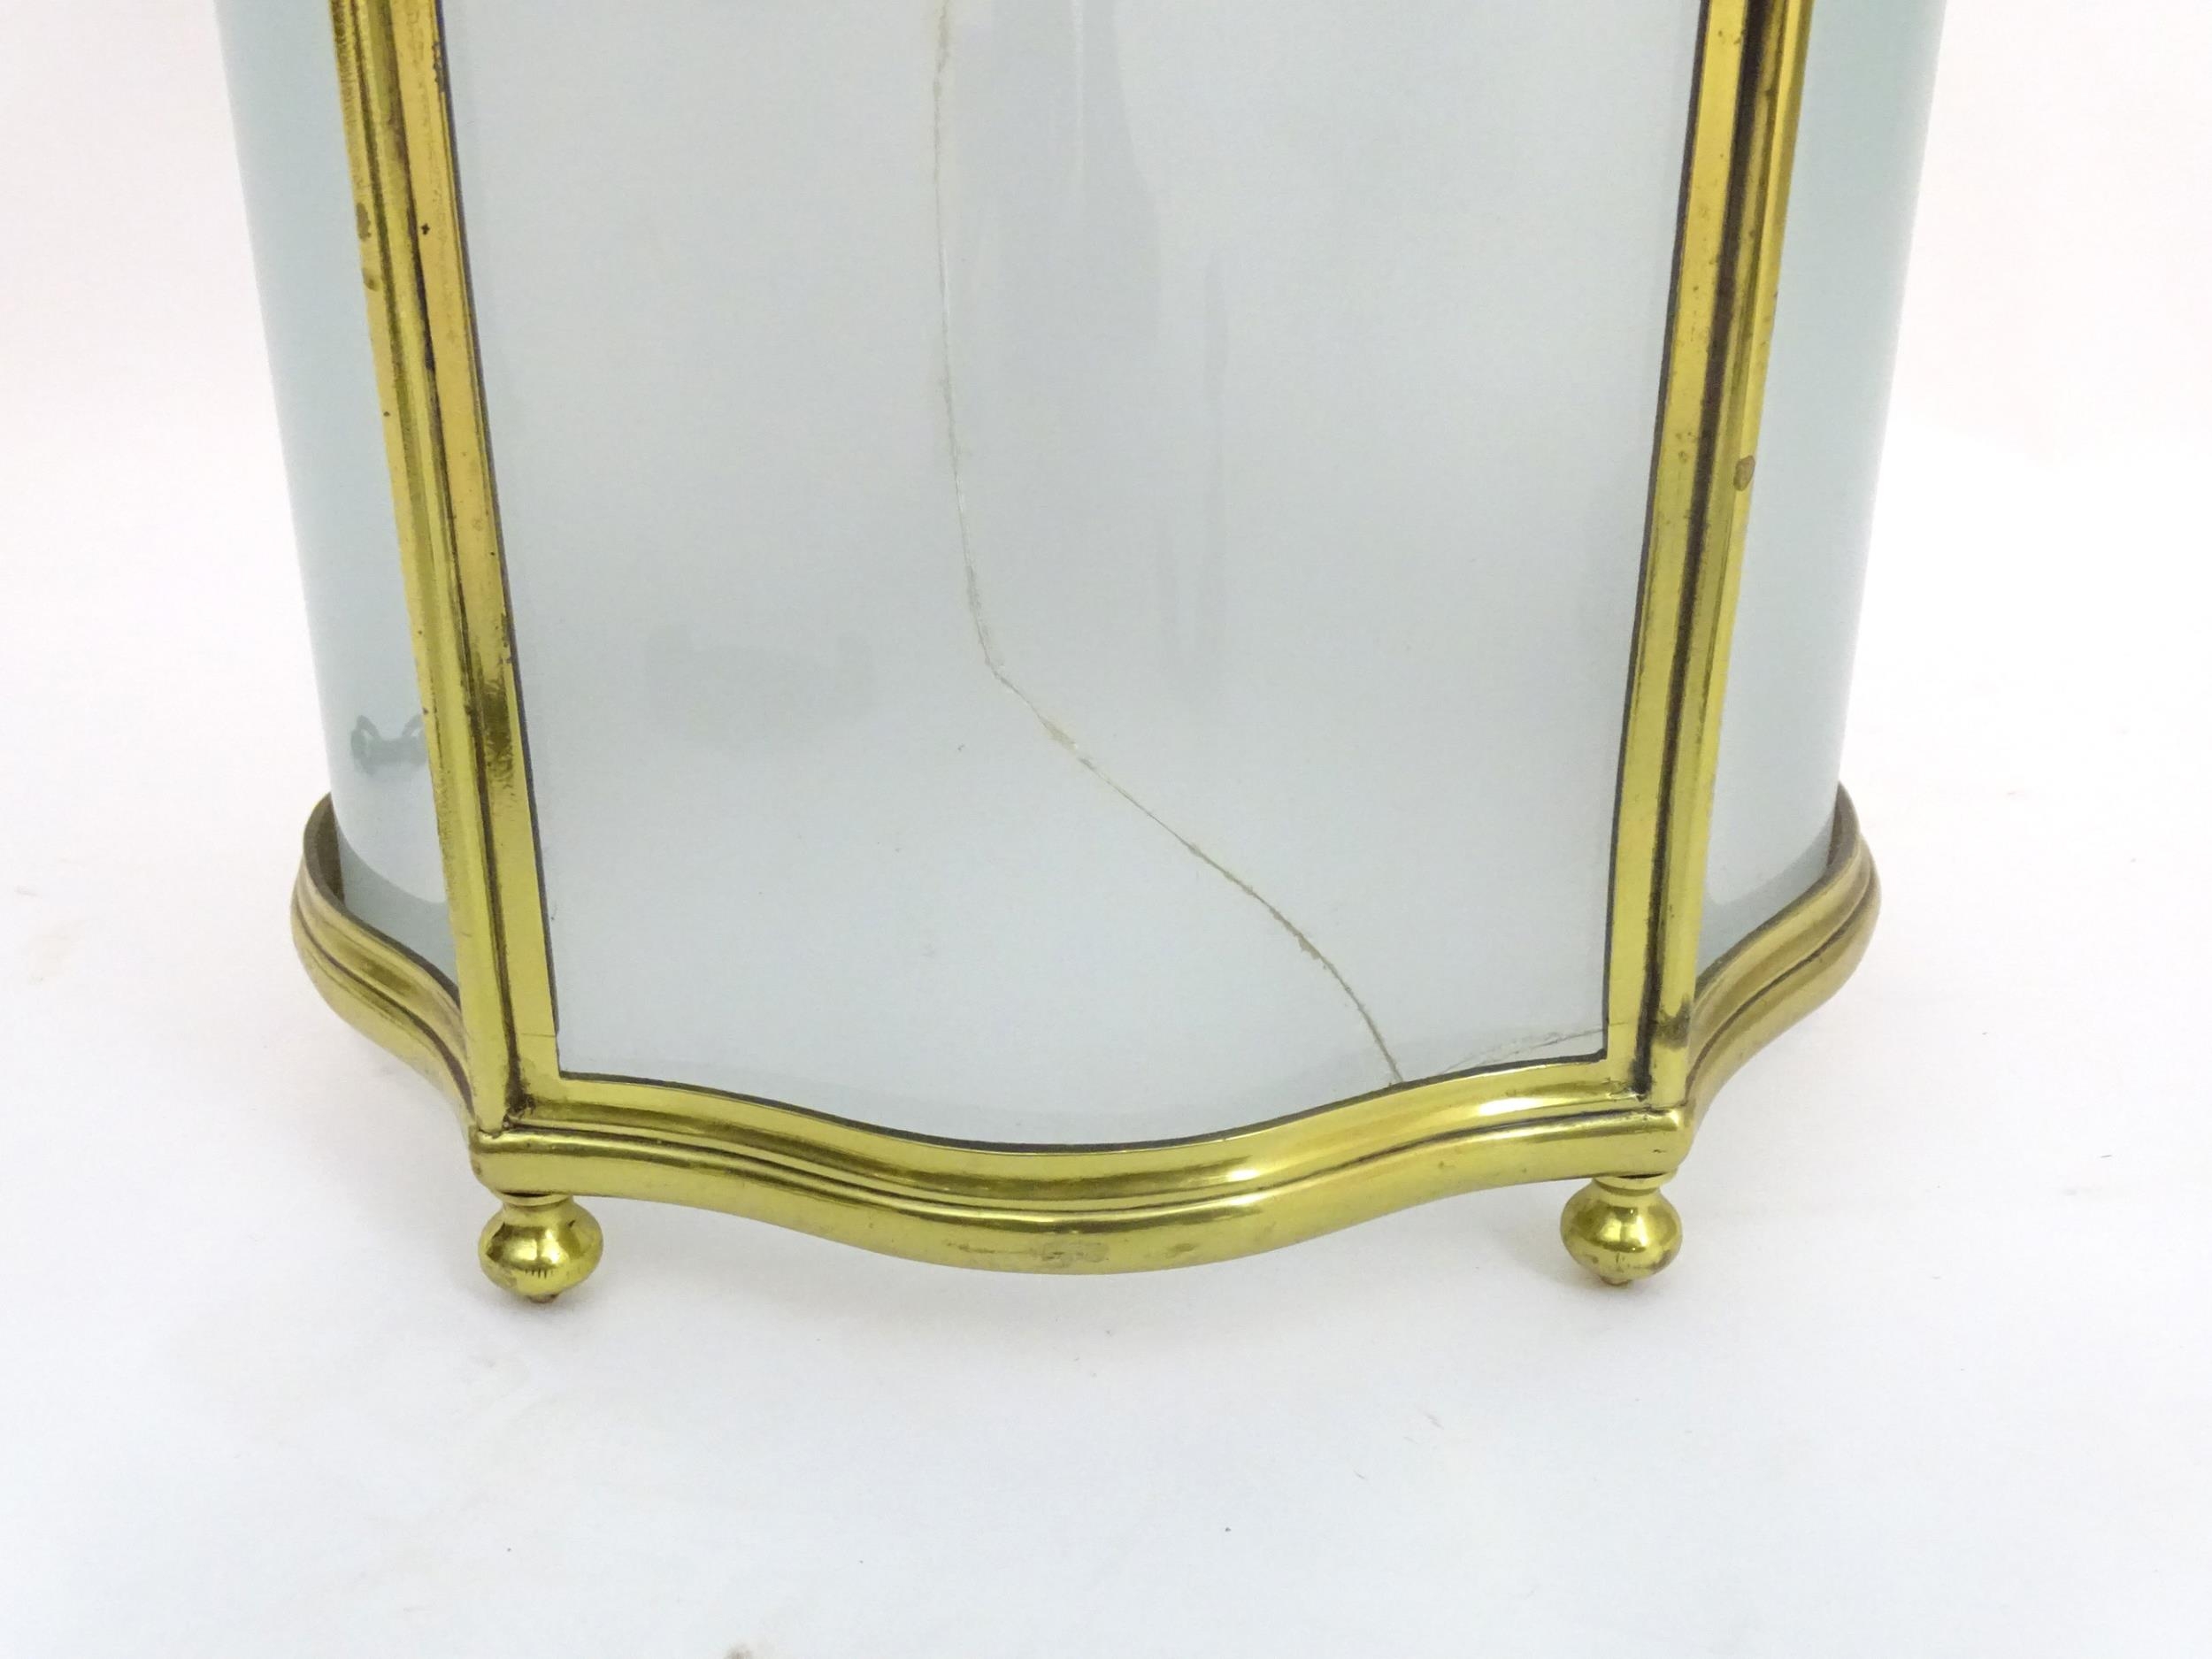 A 19thC brass hanging lantern and original bracket, the shade with five panels of frosted glass - Image 7 of 7